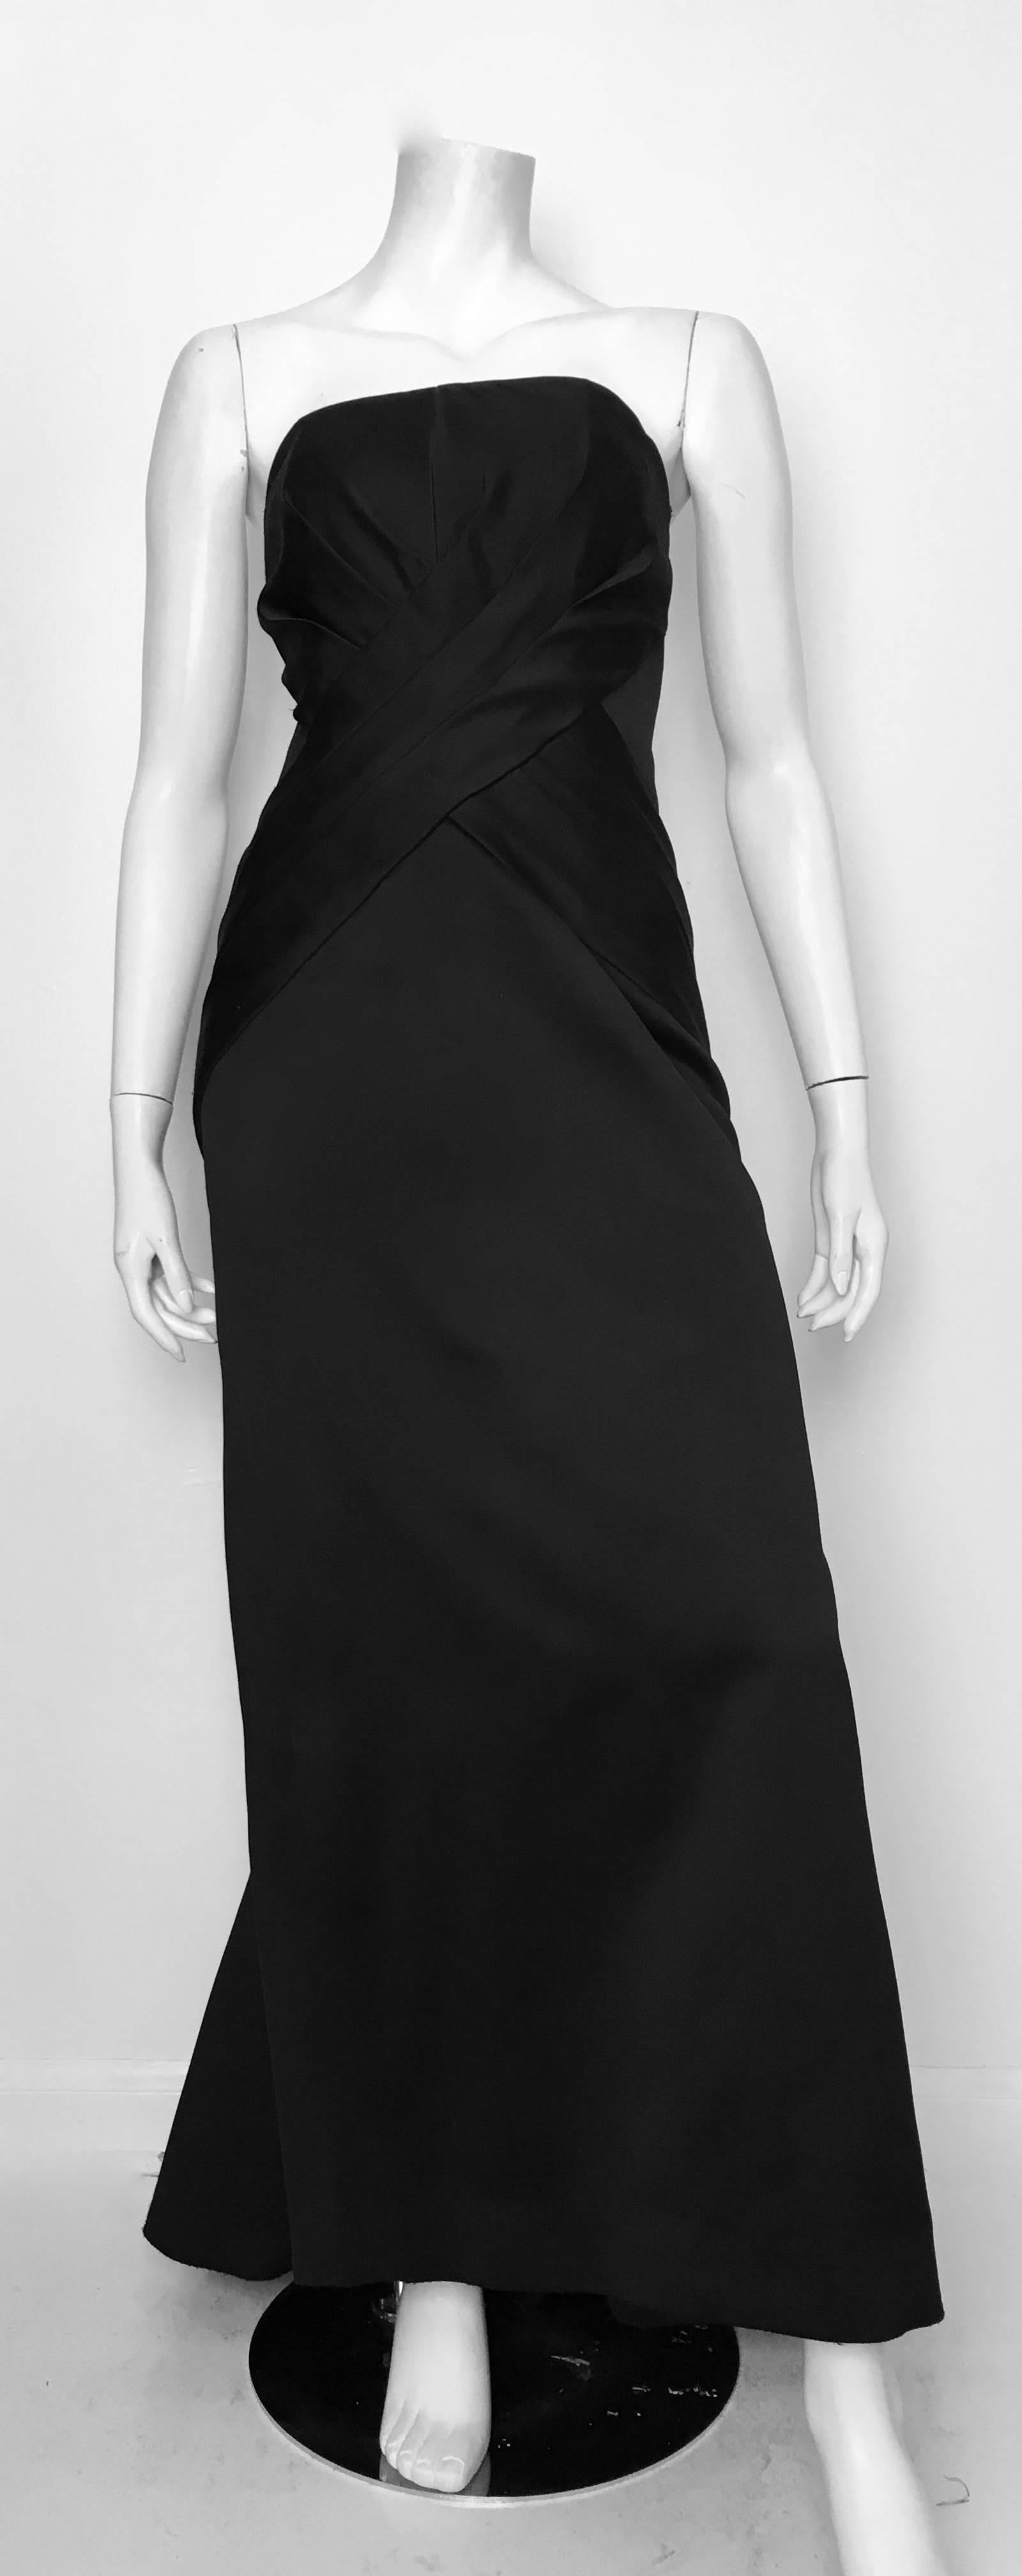 Victor Costa for Bergdorf Goodman 1980s black strapless red carpet gown is a size 4.  This fits Matilda the Mannequin perfectly so if you have the body type like Matilda then this gown is for you. Ladies please grab your trusted friend, Mr. Tape